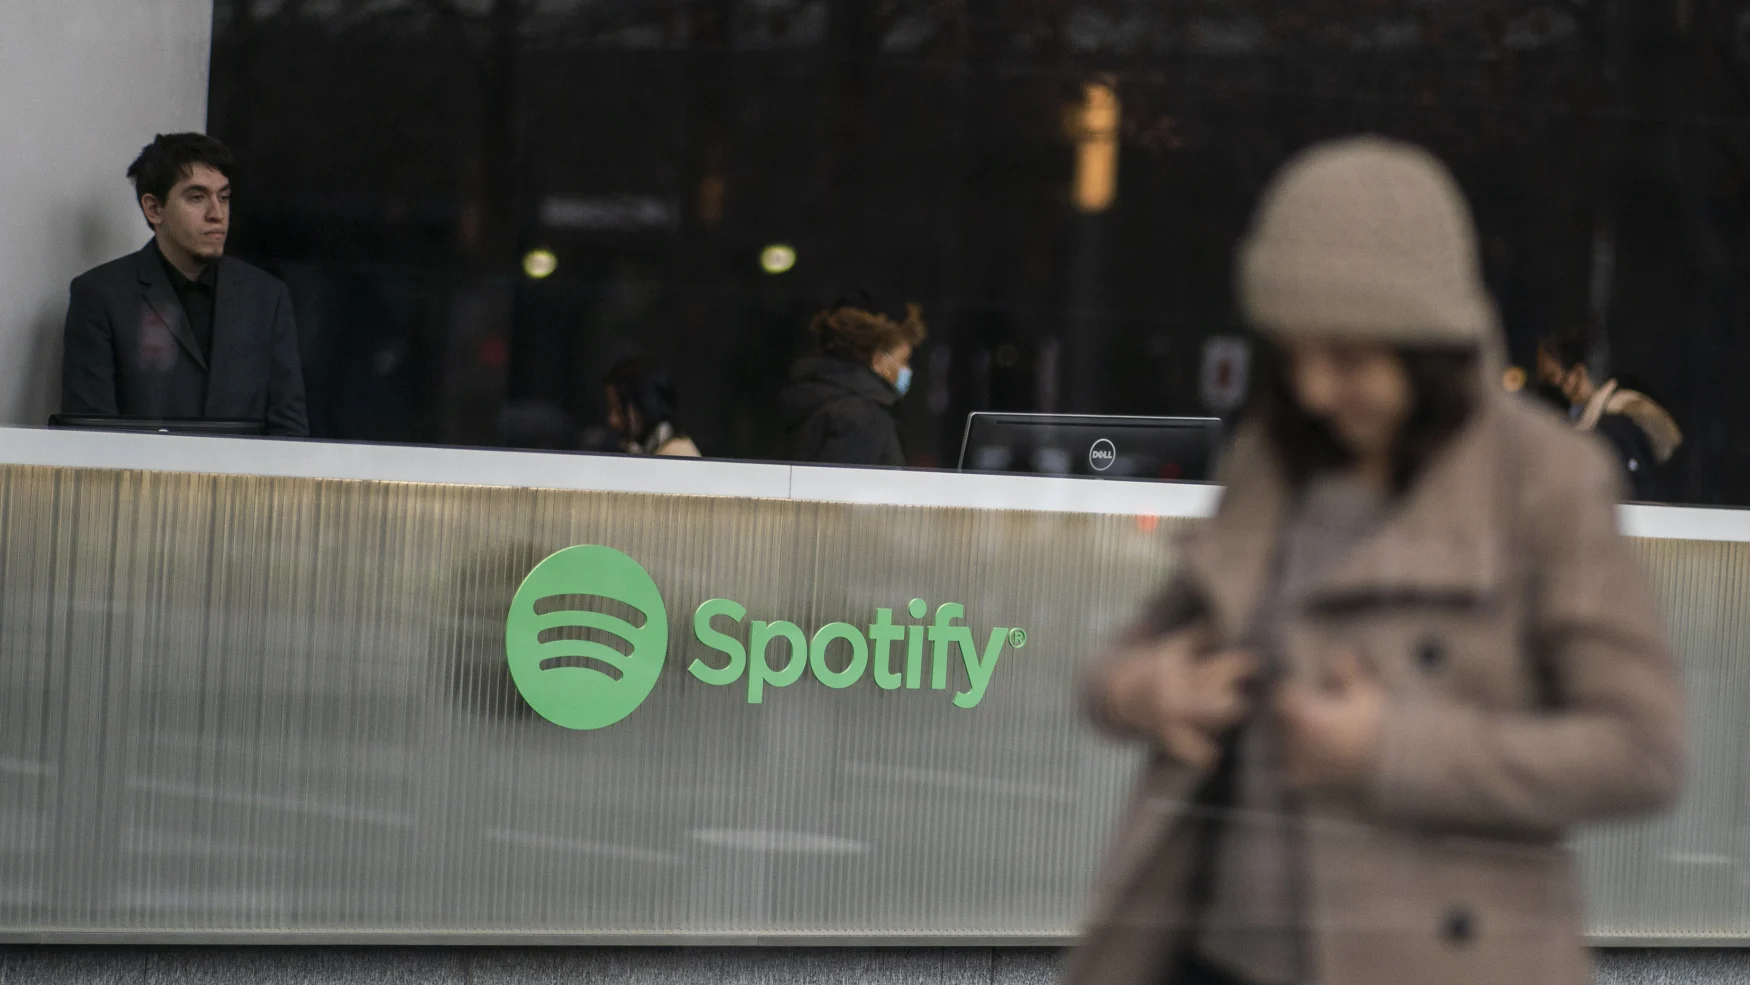 NEW YORK, NEW YORK - JANUARY 23: People are seen inside the Spotify headquarters building in Lower Manhattan on January 23, 2023 in New York City.  Spotify announced Monday that it will cut 6% of its global workforce.  (Photo by Eduardo Muñoz Álvarez/VIEWpress via Getty Images)